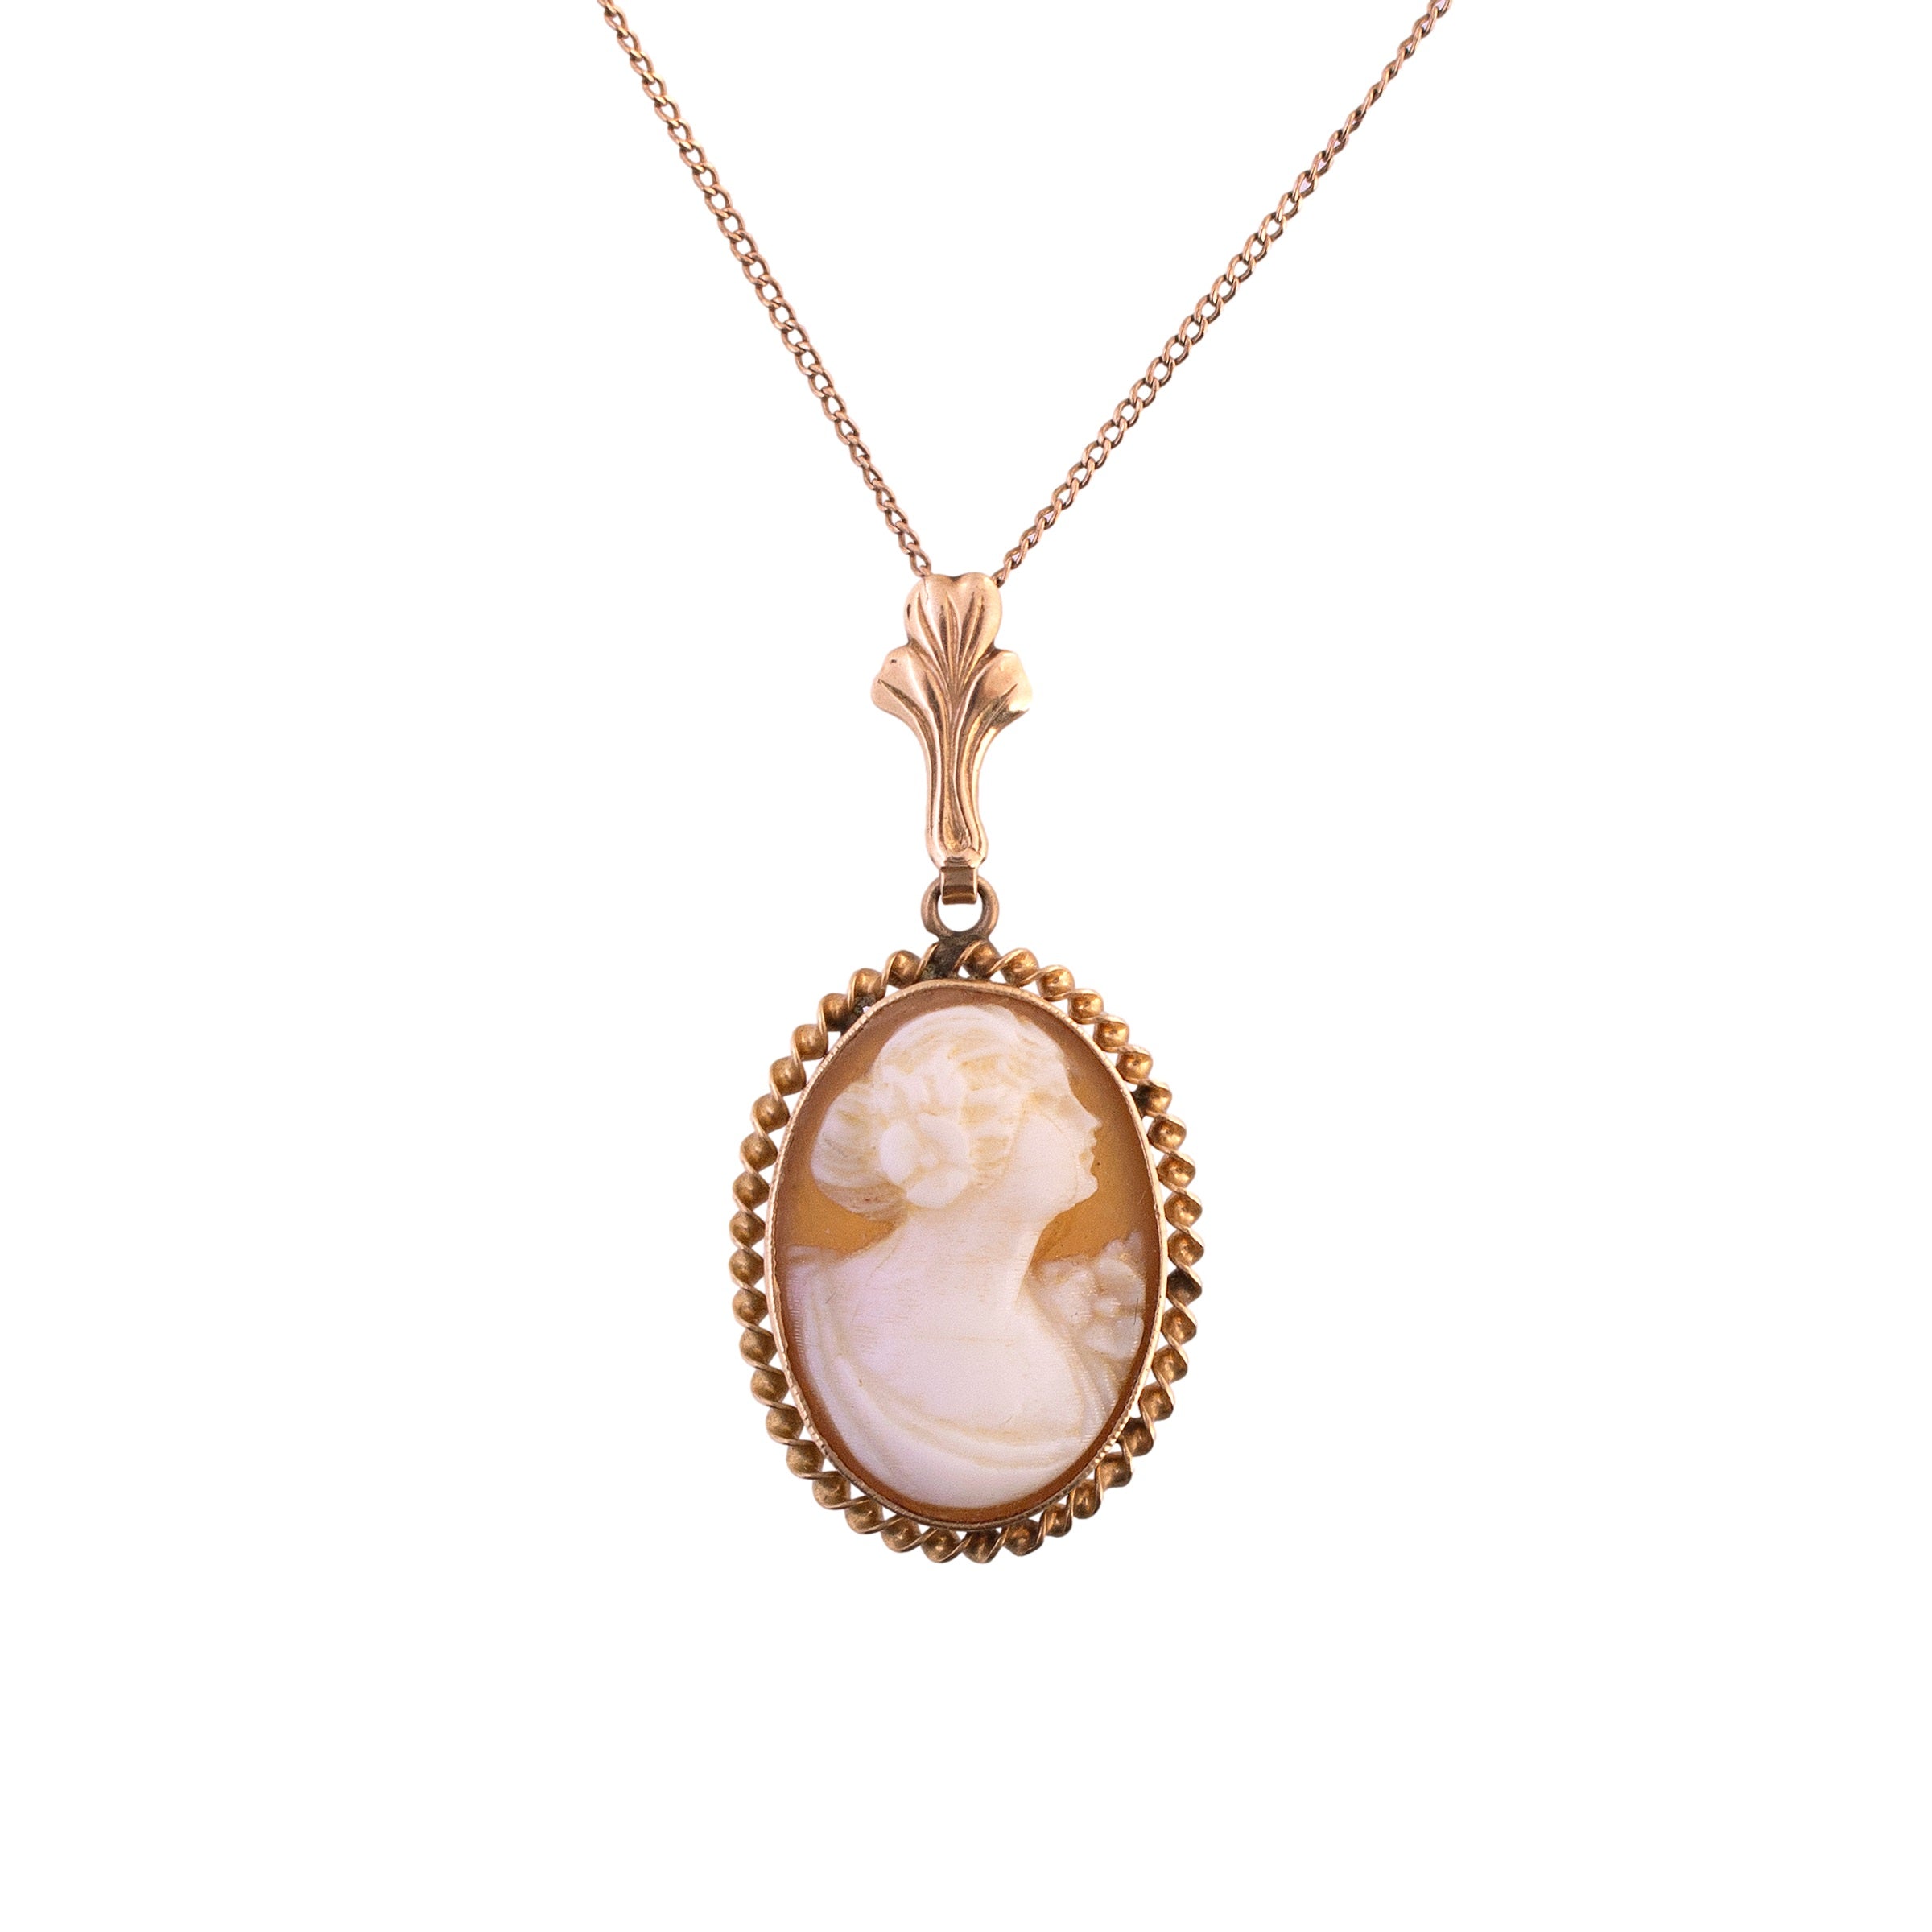 10K Gold Shell Cameo Necklace